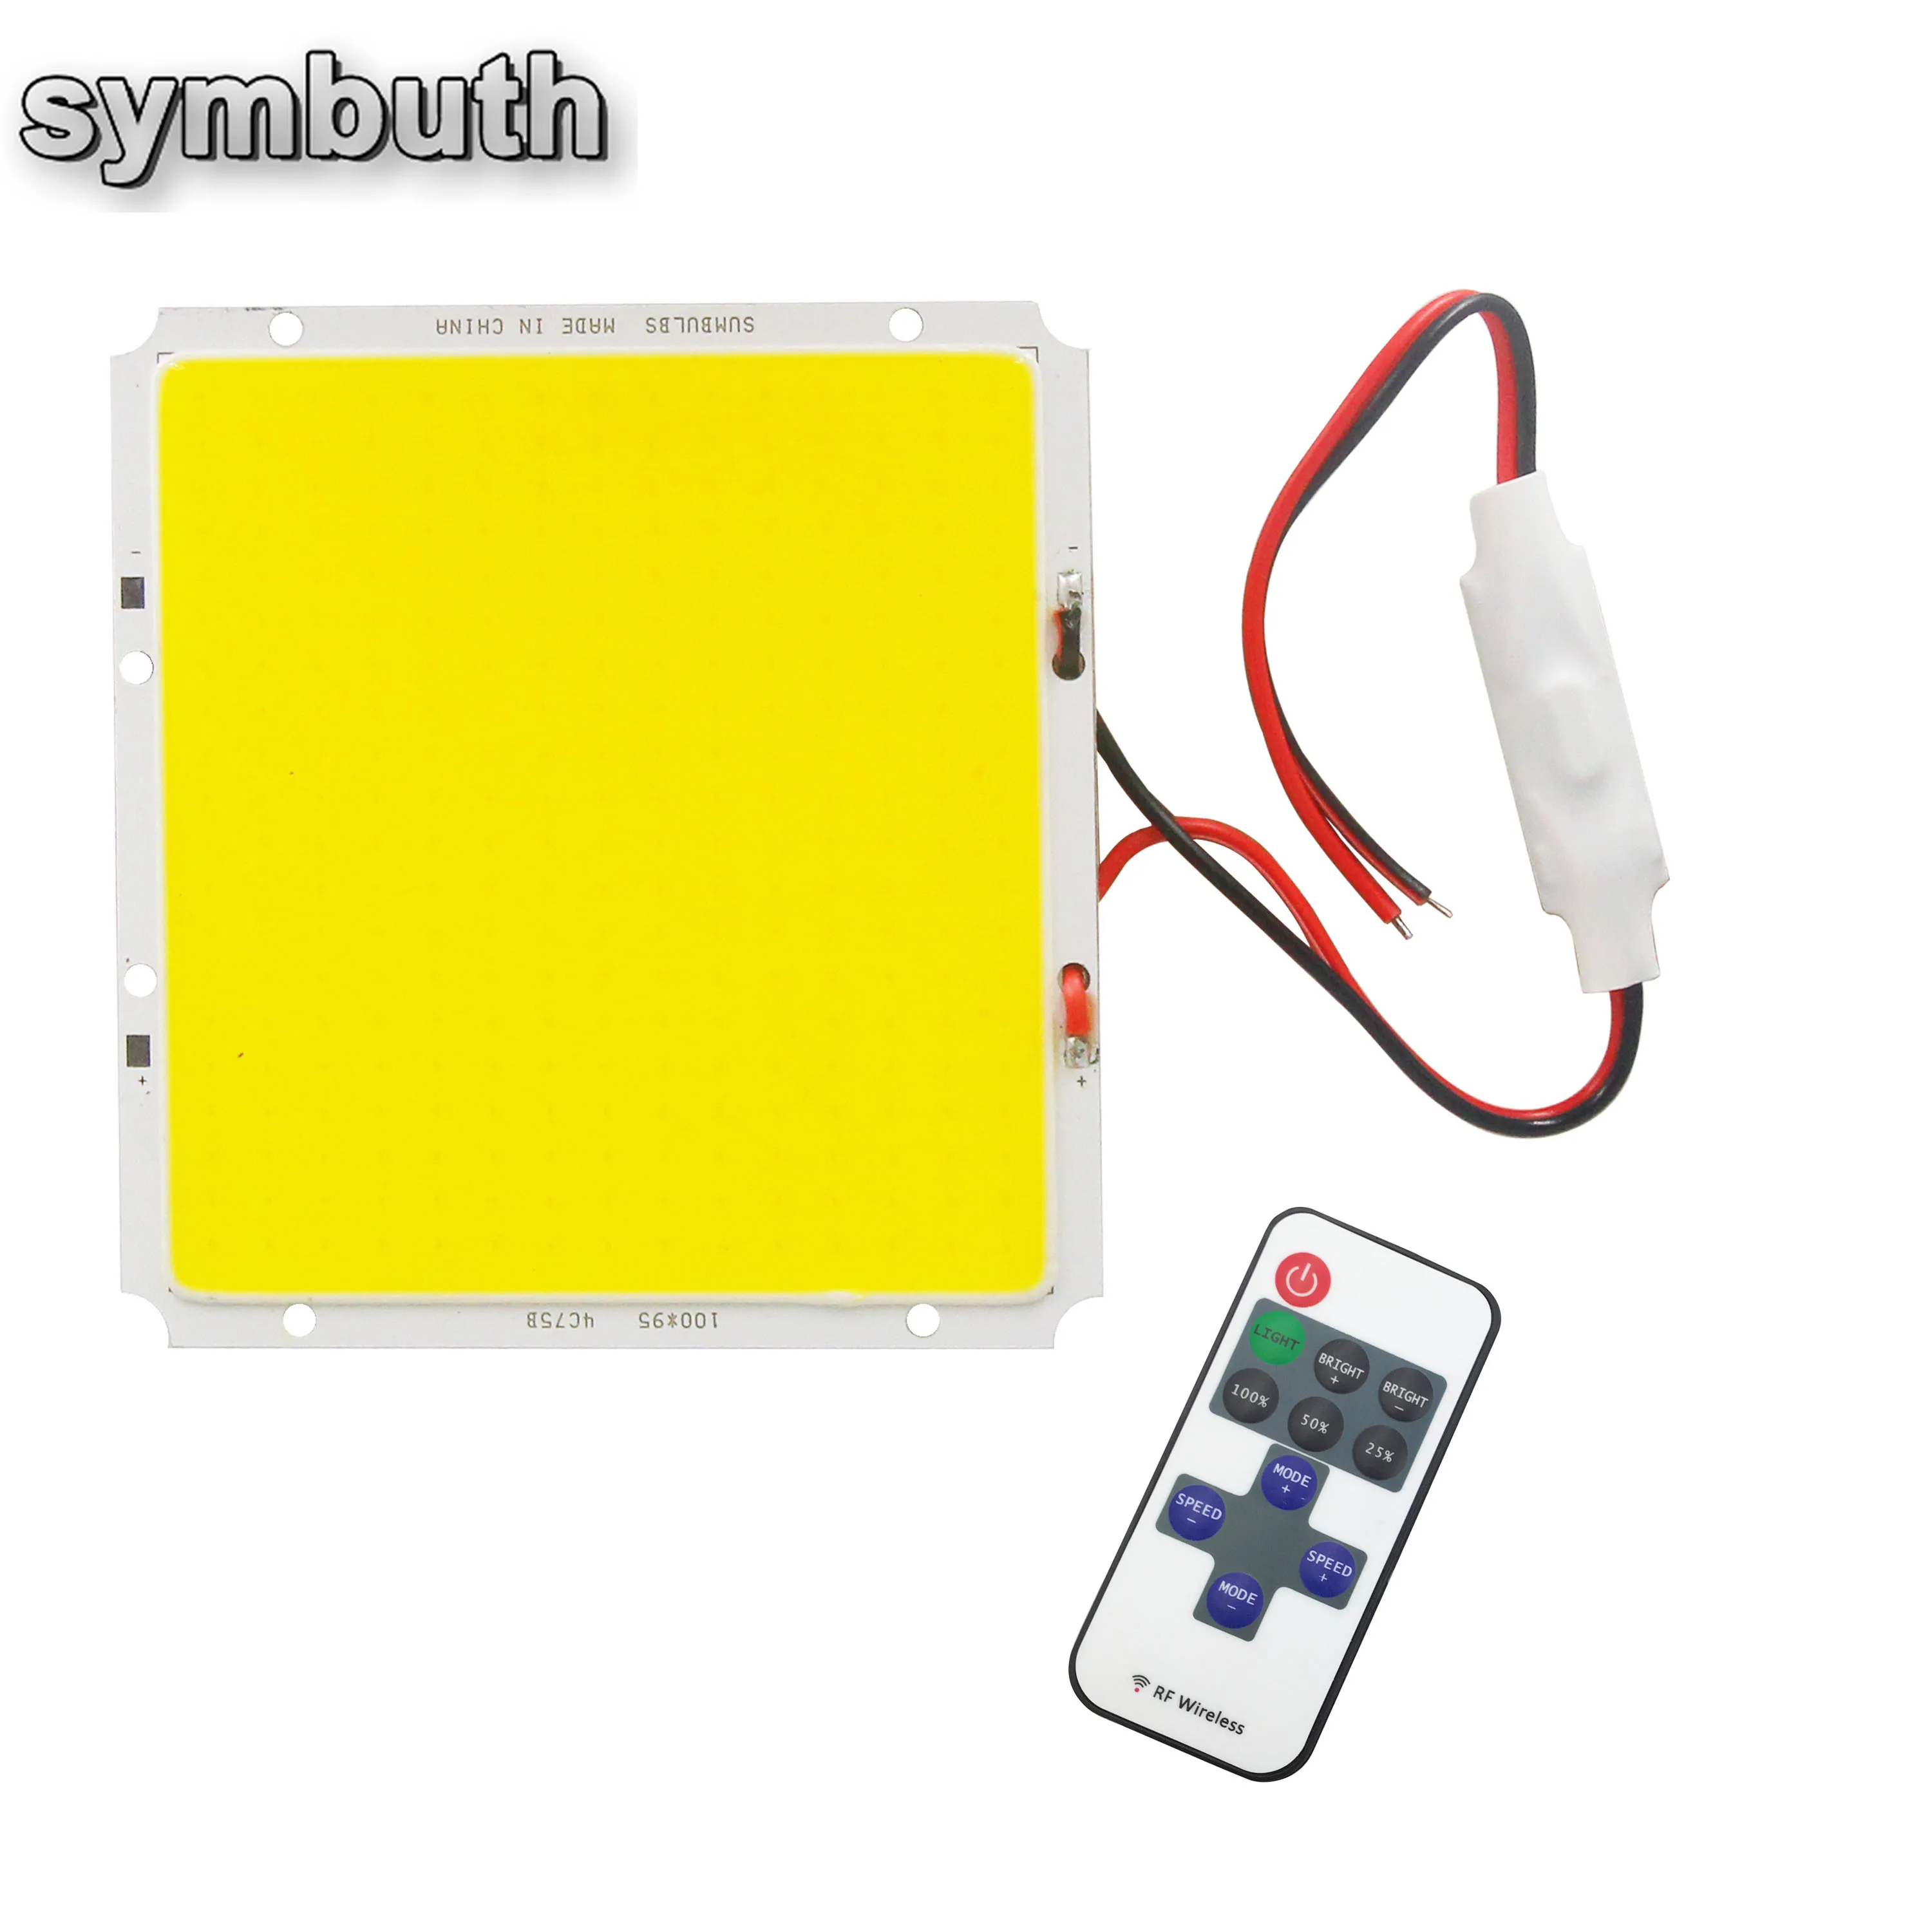 DC 12V Input 100x95MM 50W COB LED Panel Light Source for Led Lamp Warm Cold White Matrix Bulb with RF Remote Dimmer